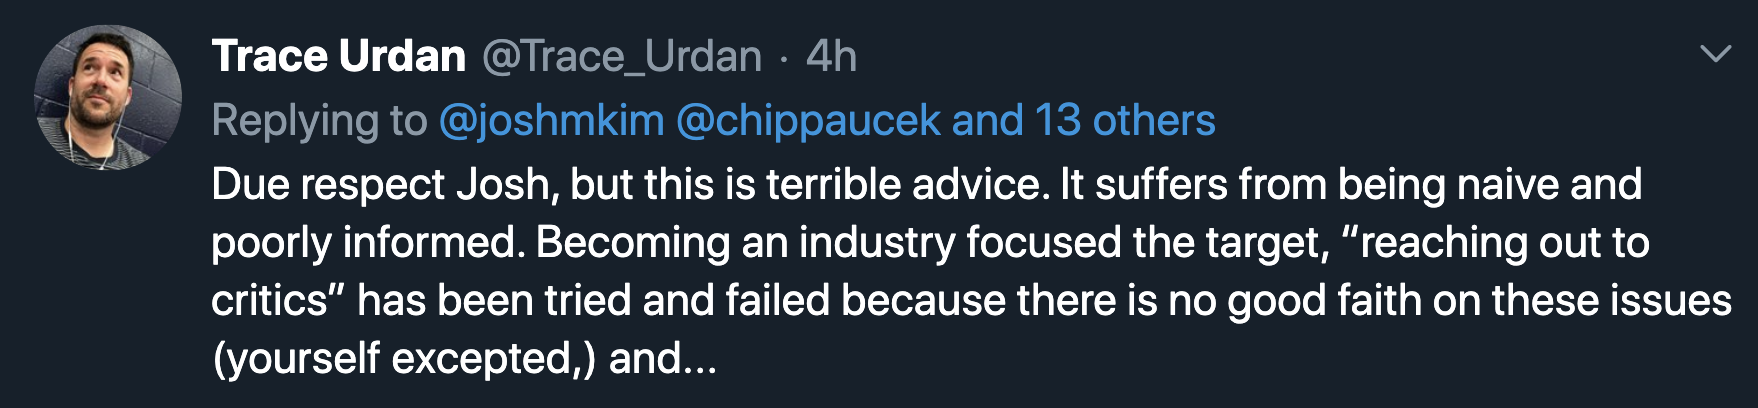 Due respect Josh, but this is terrible advice. It suffers from being naïve and poorly informed. Becoming an industry focused the target, "reaching out to critics" has been tried and failed because there is no good faith on these issues (yourself excepted), and…